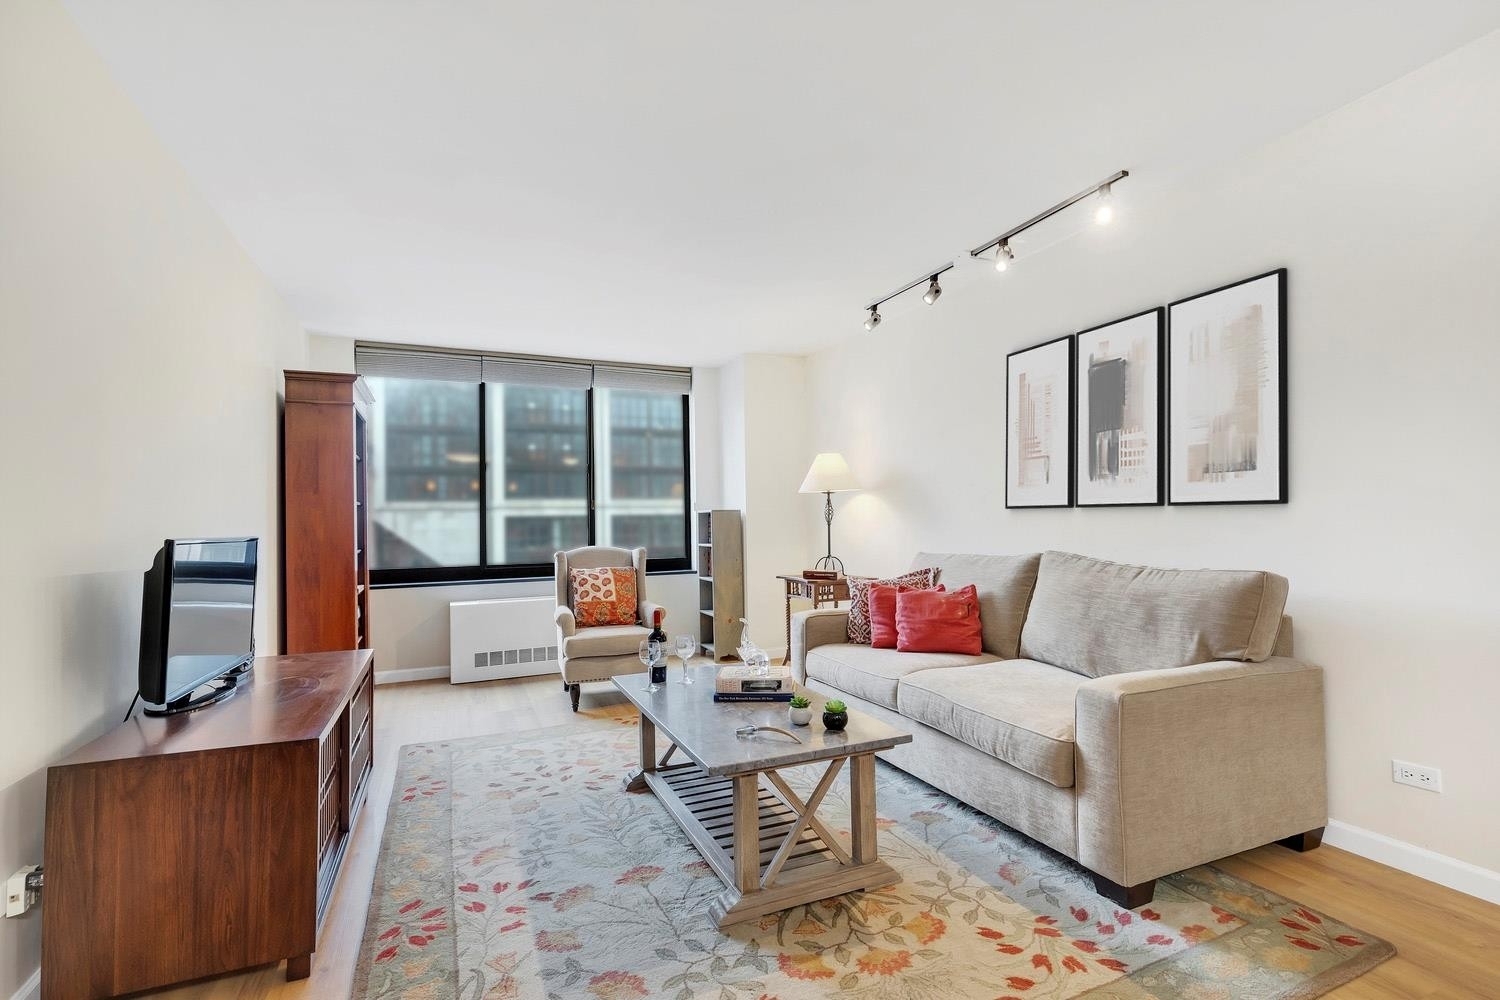 Condominium for Sale at Princeton House, 215 W 95TH ST, 7L Upper West Side, New York, NY 10025